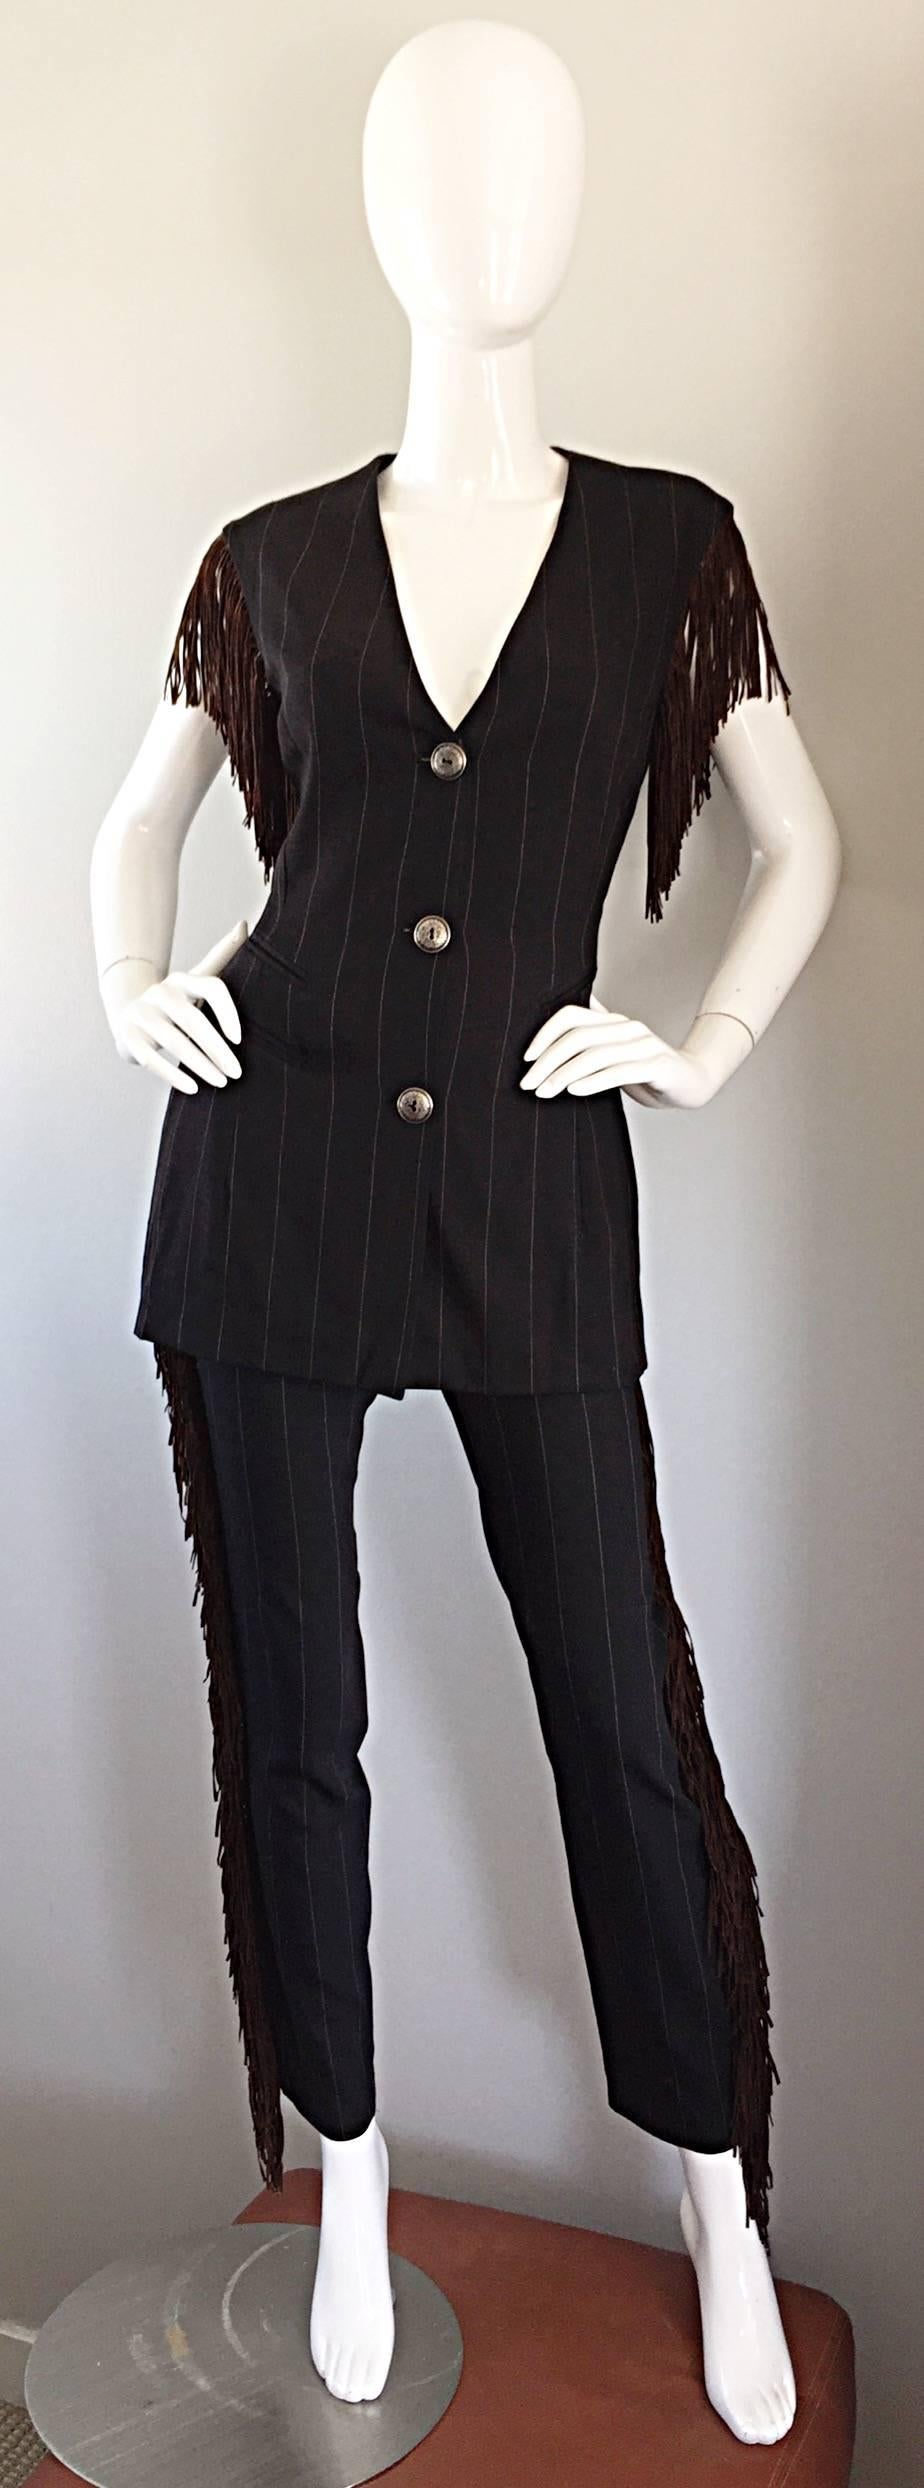 Incredible, and oh so rare vintage RIFAT OZBEK black and white pinstripe tailored pant suit, with brown suede fringe! Waistcoat is fitted, and features three silver buttons down the bodice. Brown suede fringe at each arm. Trousers are high waisted